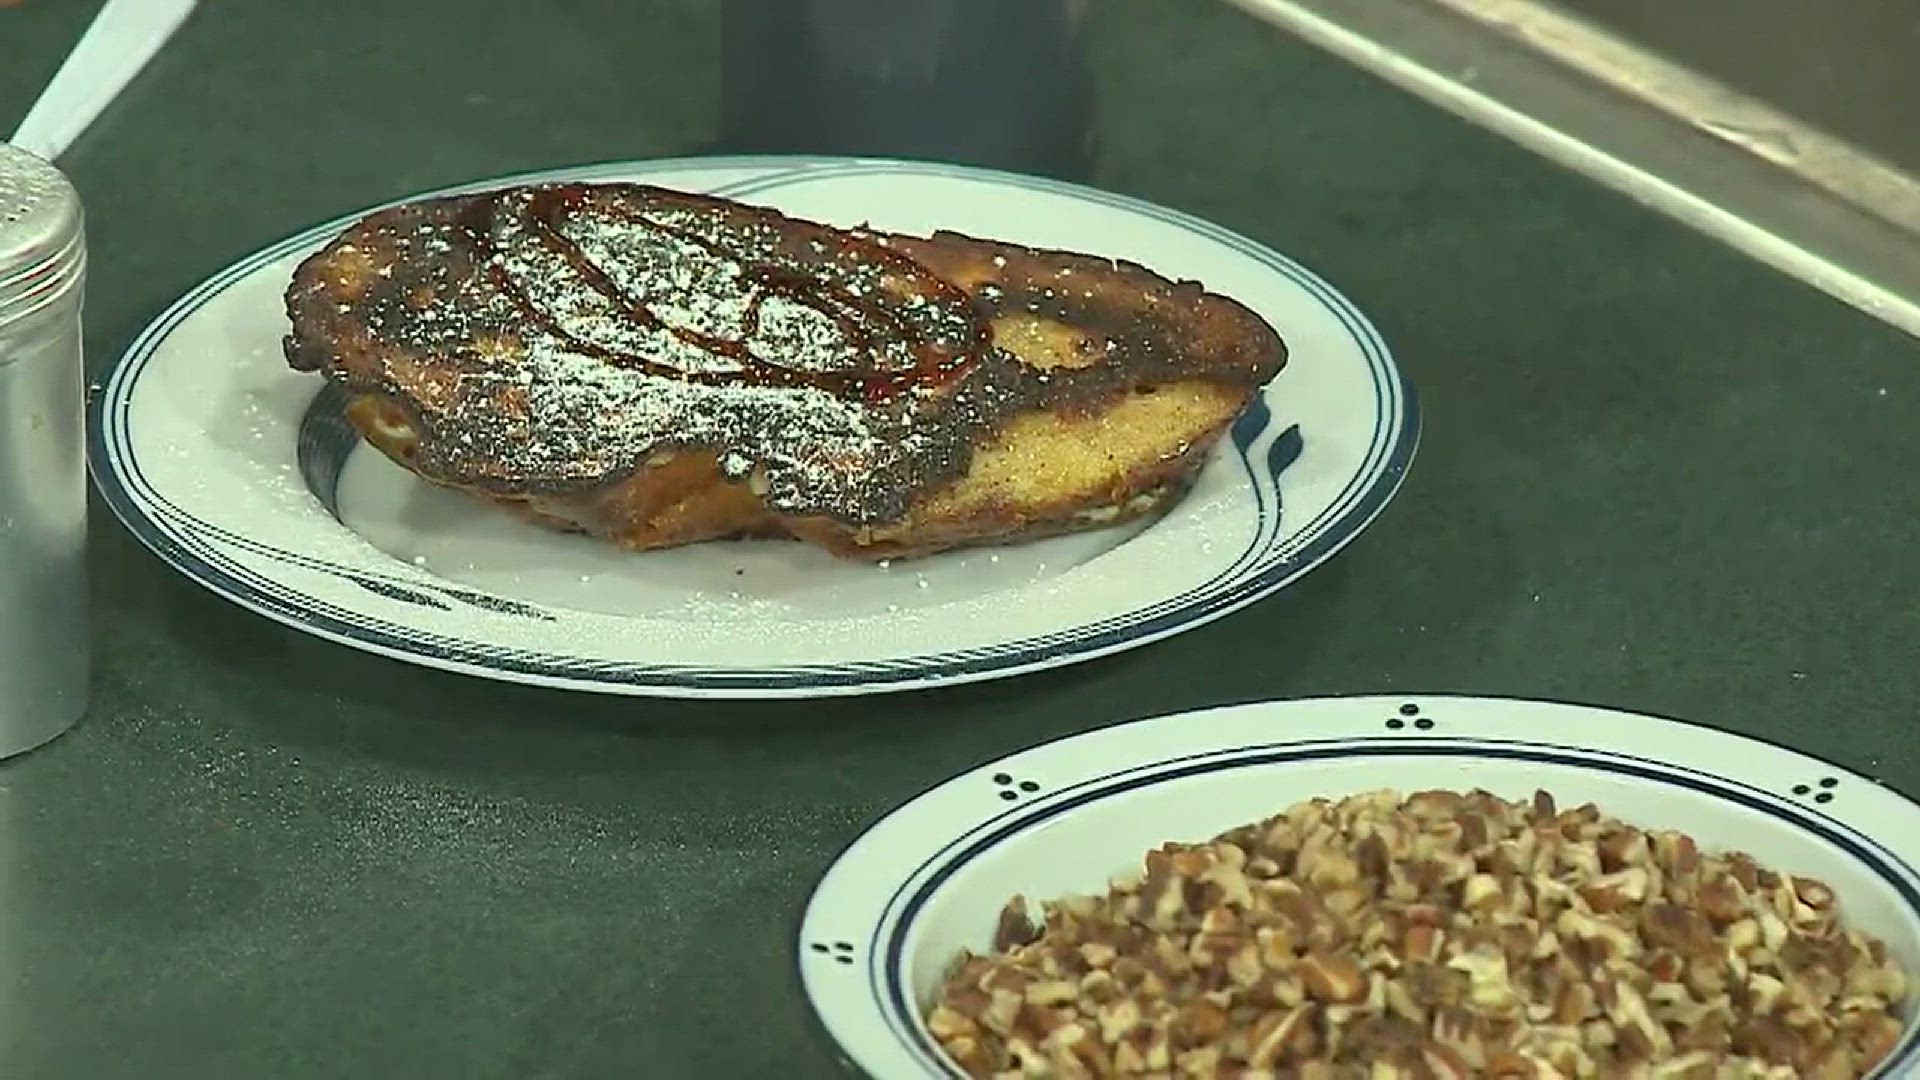 In honor of the upcoming National Pecan Day, we are stuffing our faces with pecan stuffed French toast! Chef Kevin Belton shows us how to prepare the sweet breakfast treat.